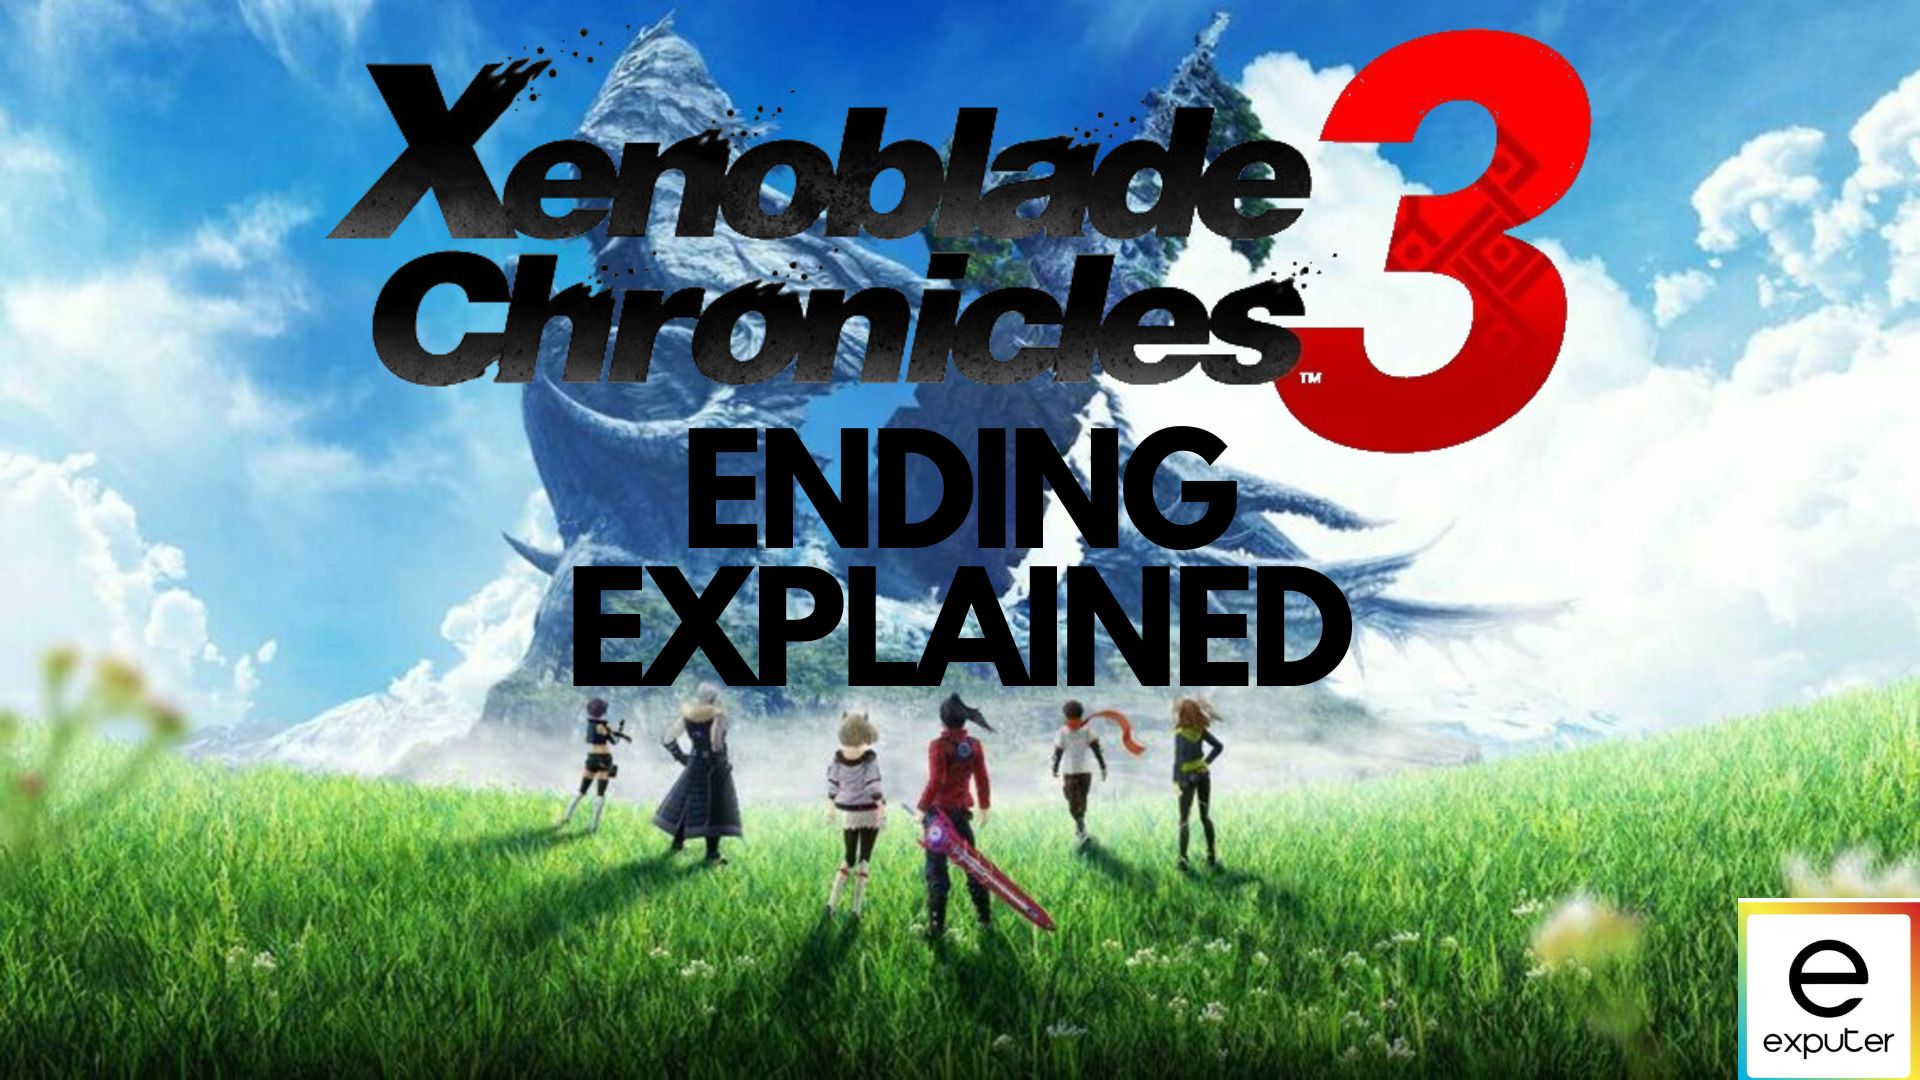 The Ending of Xenoblade chronicles 3